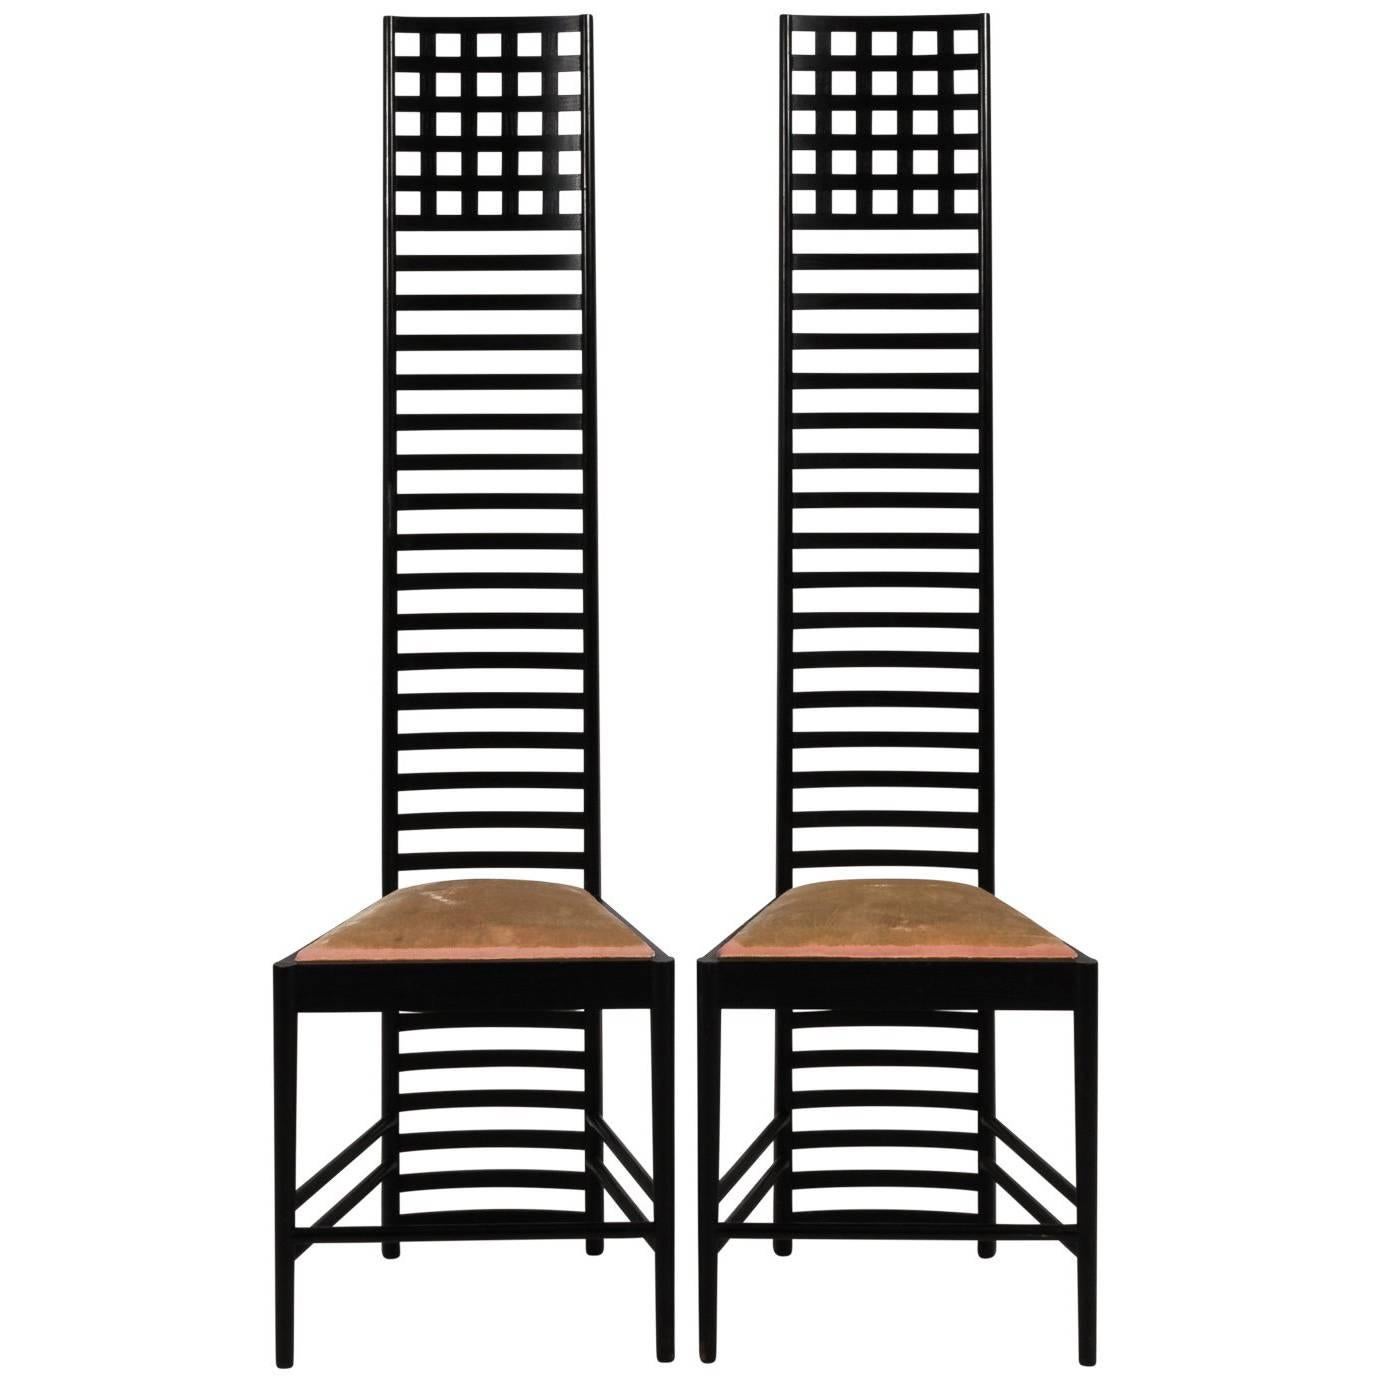 Pair of Hill House Ladder-Back Chairs, circa 1980